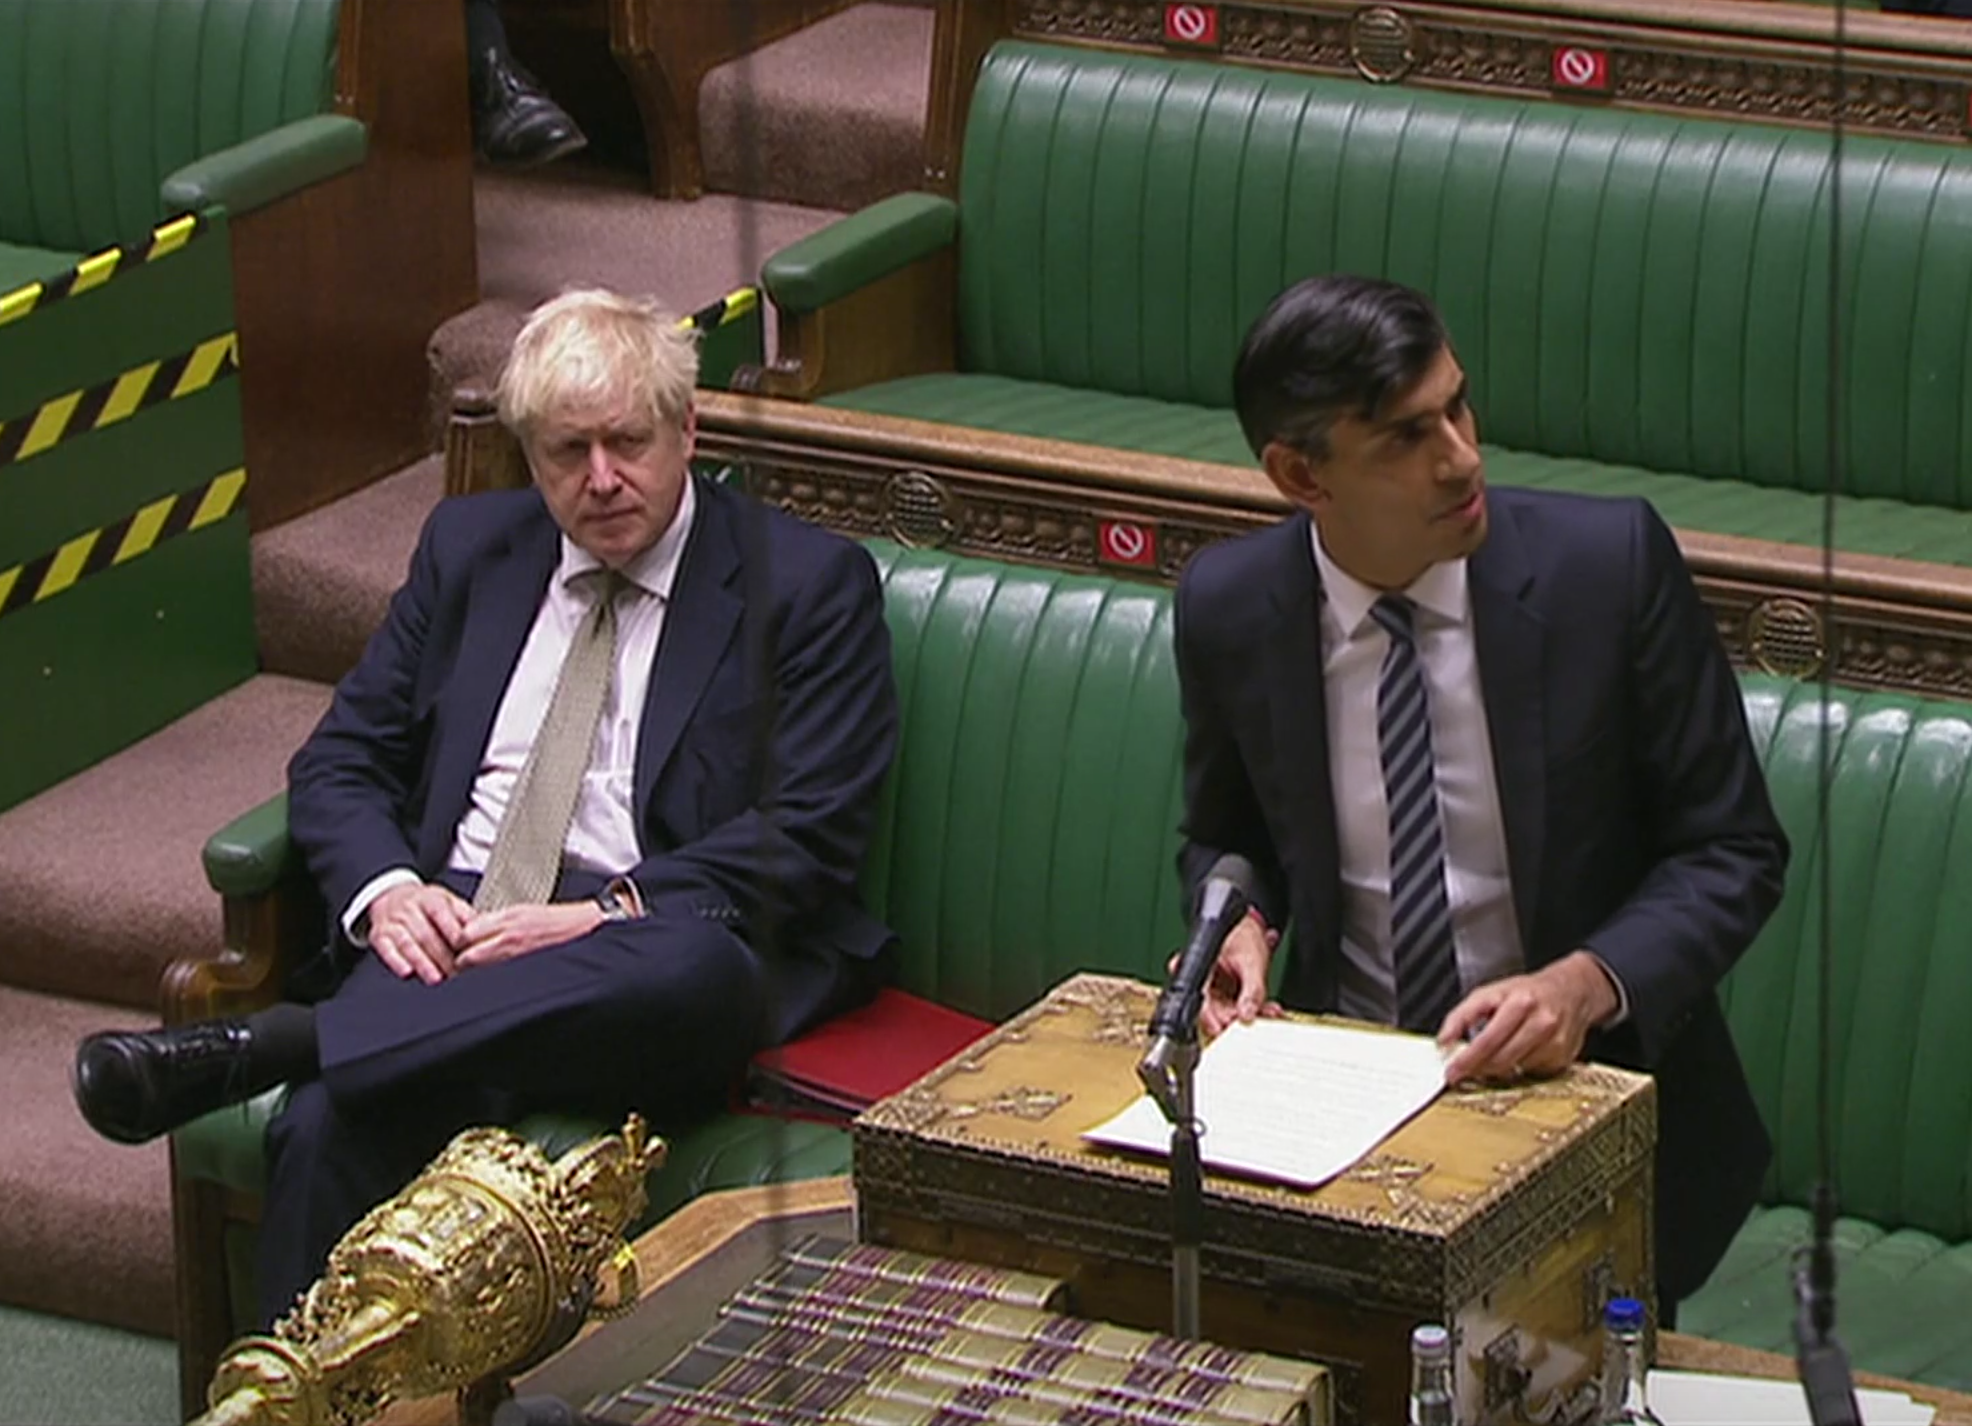 Boris Johnson, as is traditional, wants to spend more, while Rishi Sunak wants to spend less